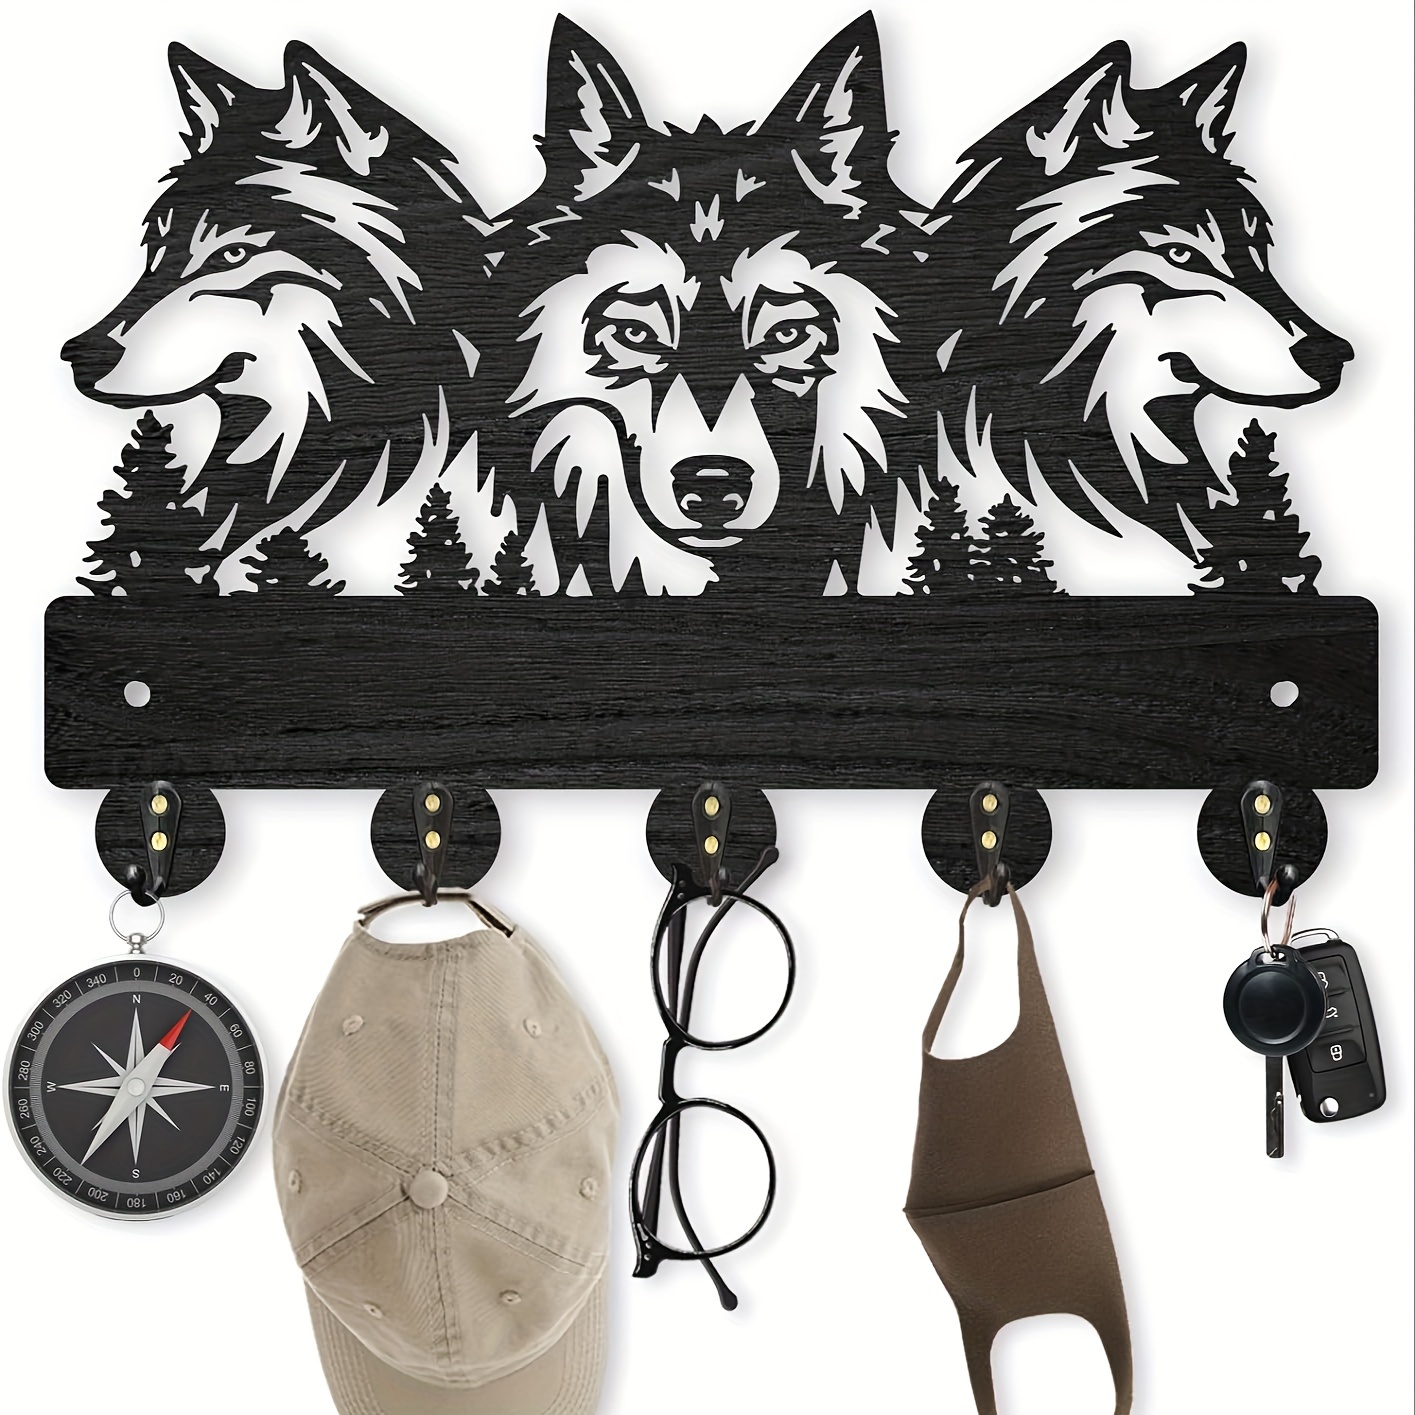 

1pc Wolf Decor Key Holder For Wall, Wall Mounted Key Racks With 5 Hook, Rustic Home Decor For Entryway Key Hooks